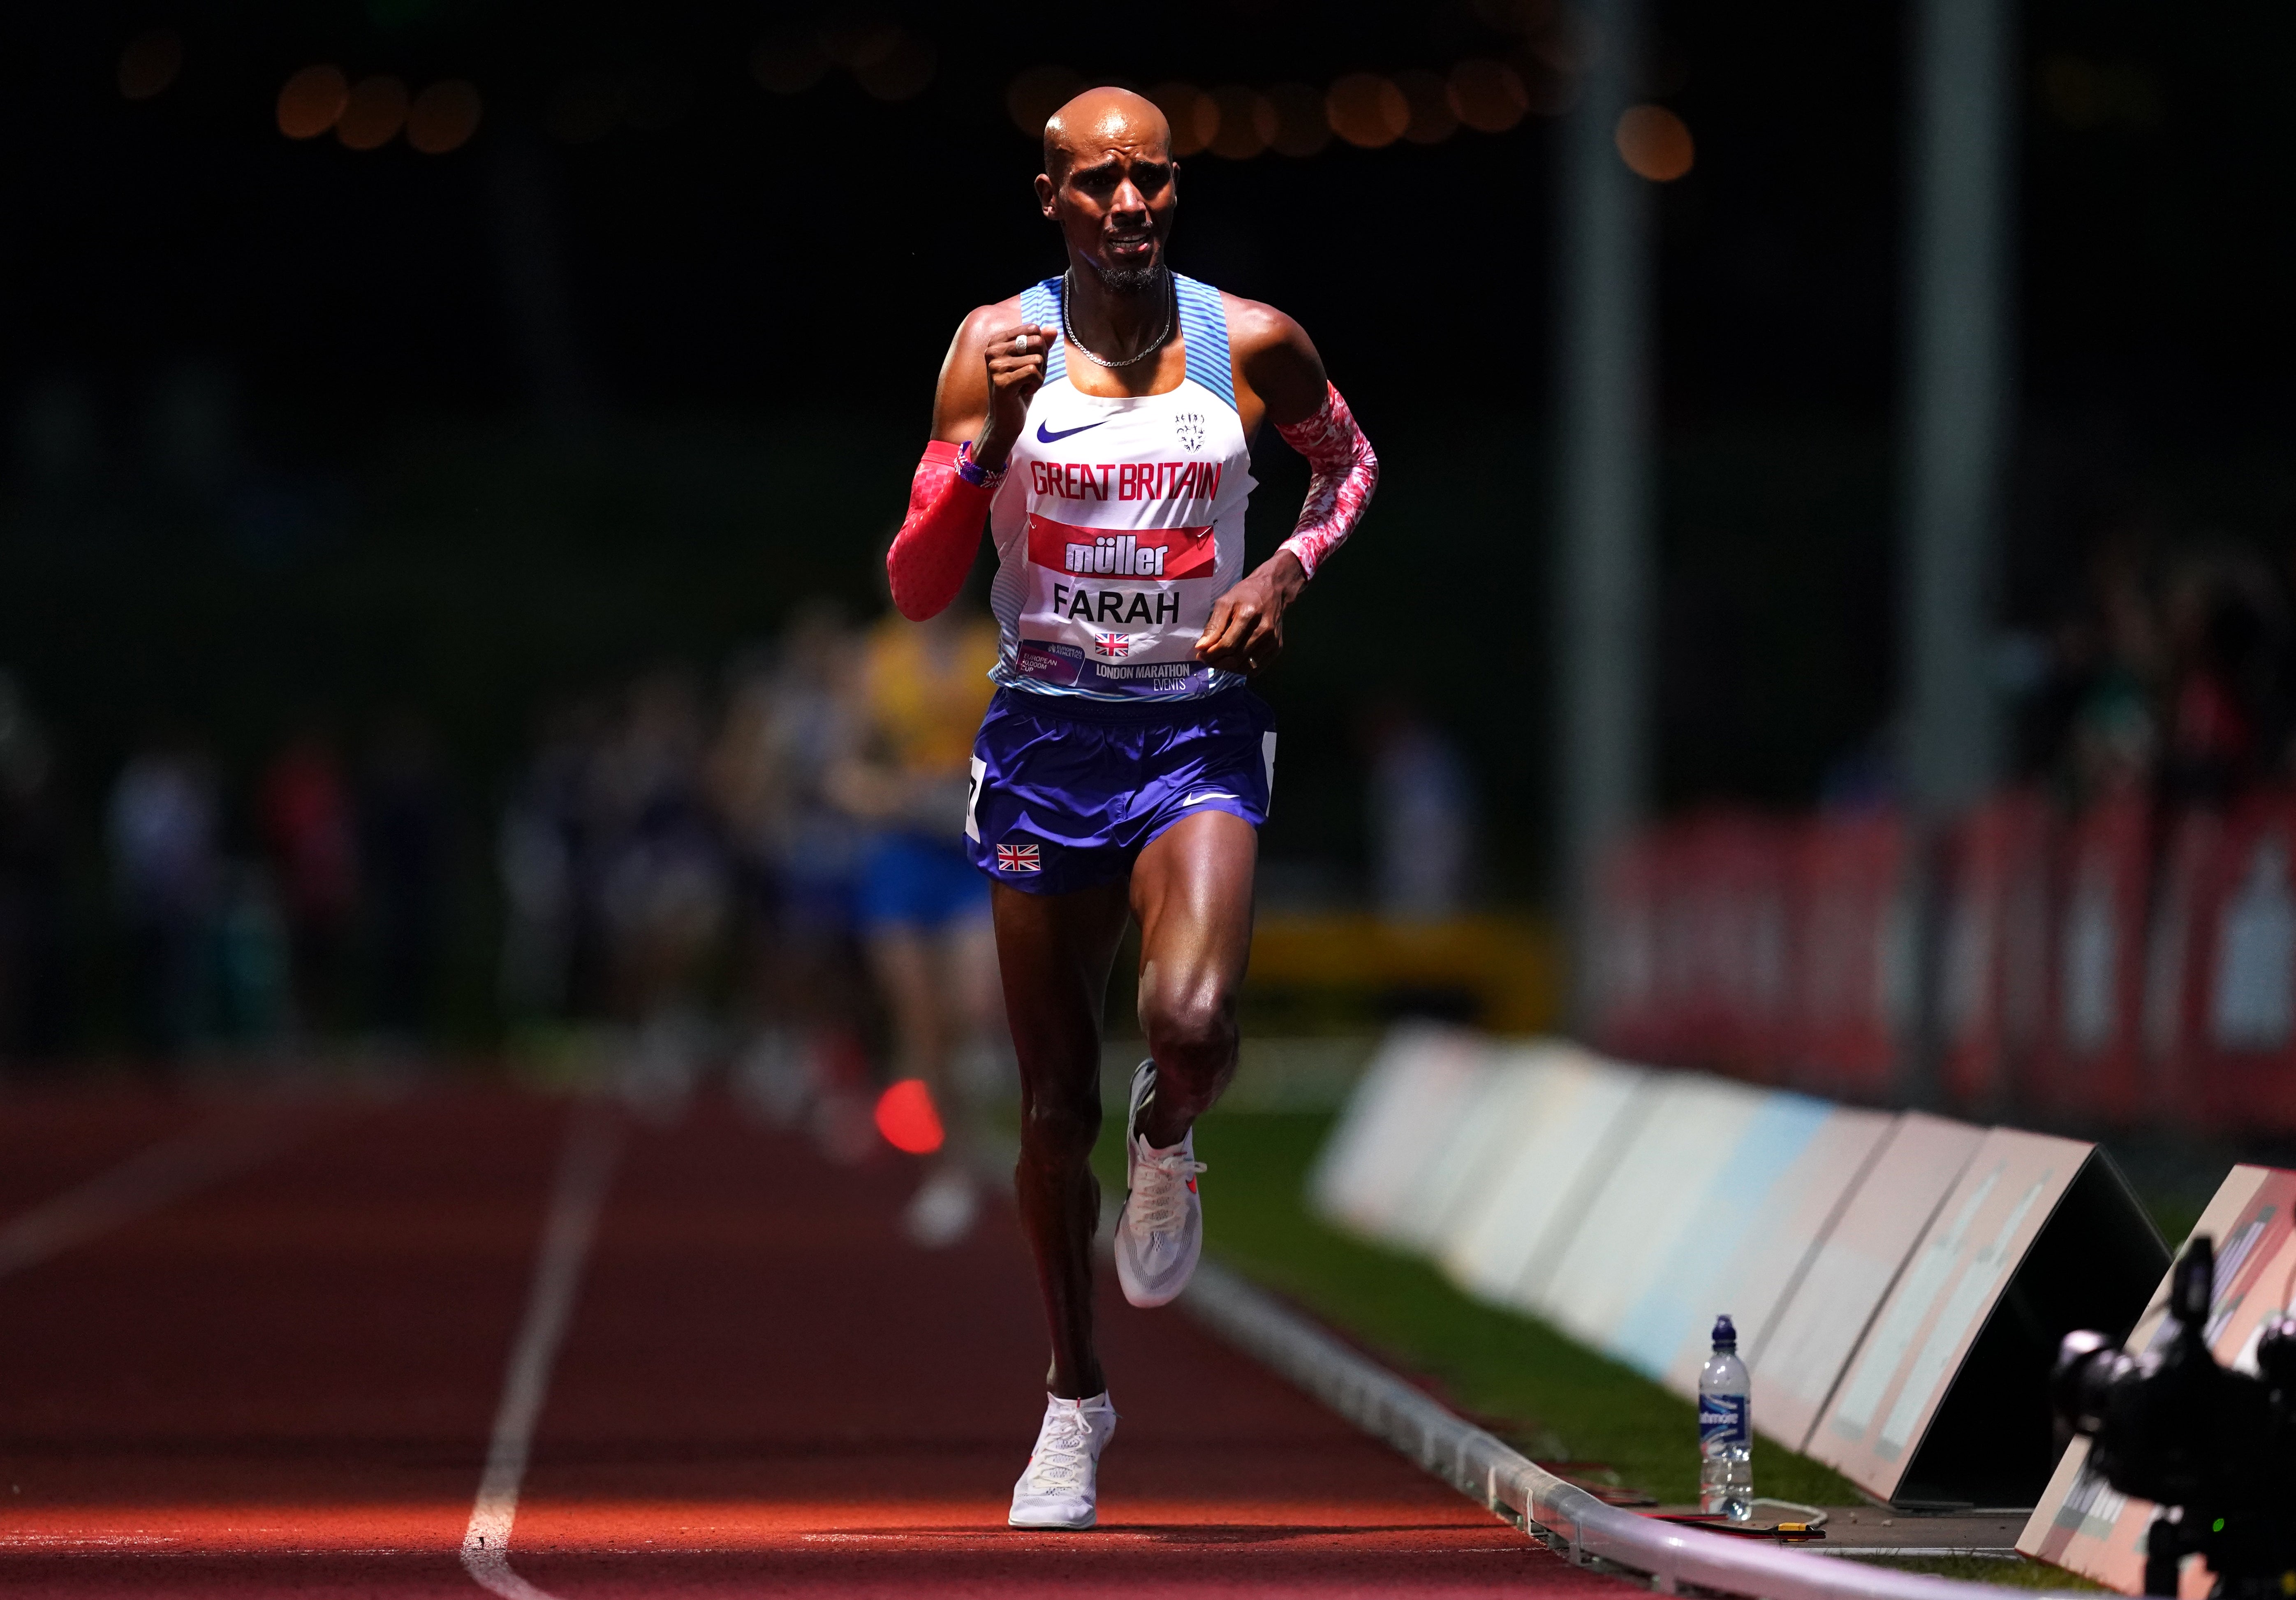 Great Britain’s Mo Farah missed the chance to qualify for the Olympics on Saturday